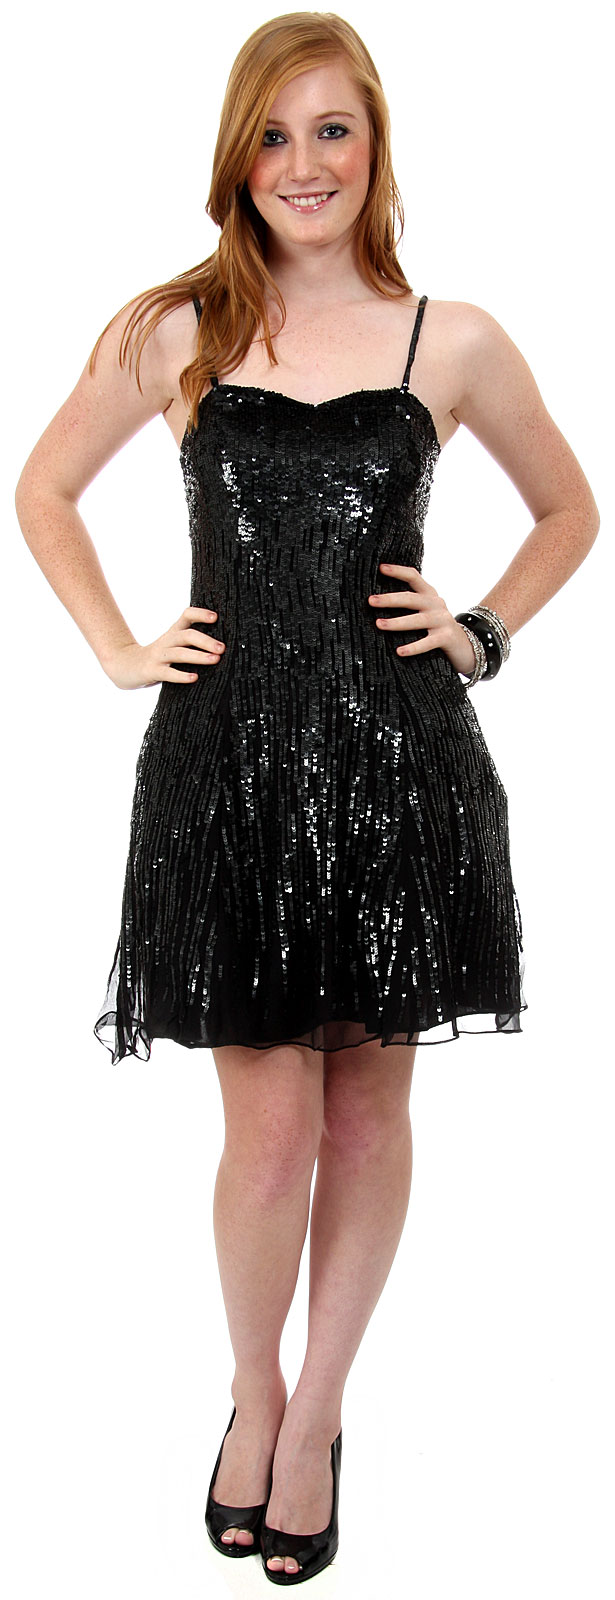 BLACK SEQUIN MINI DRESS - COMPARE PRICES, REVIEWS AND BUY AT